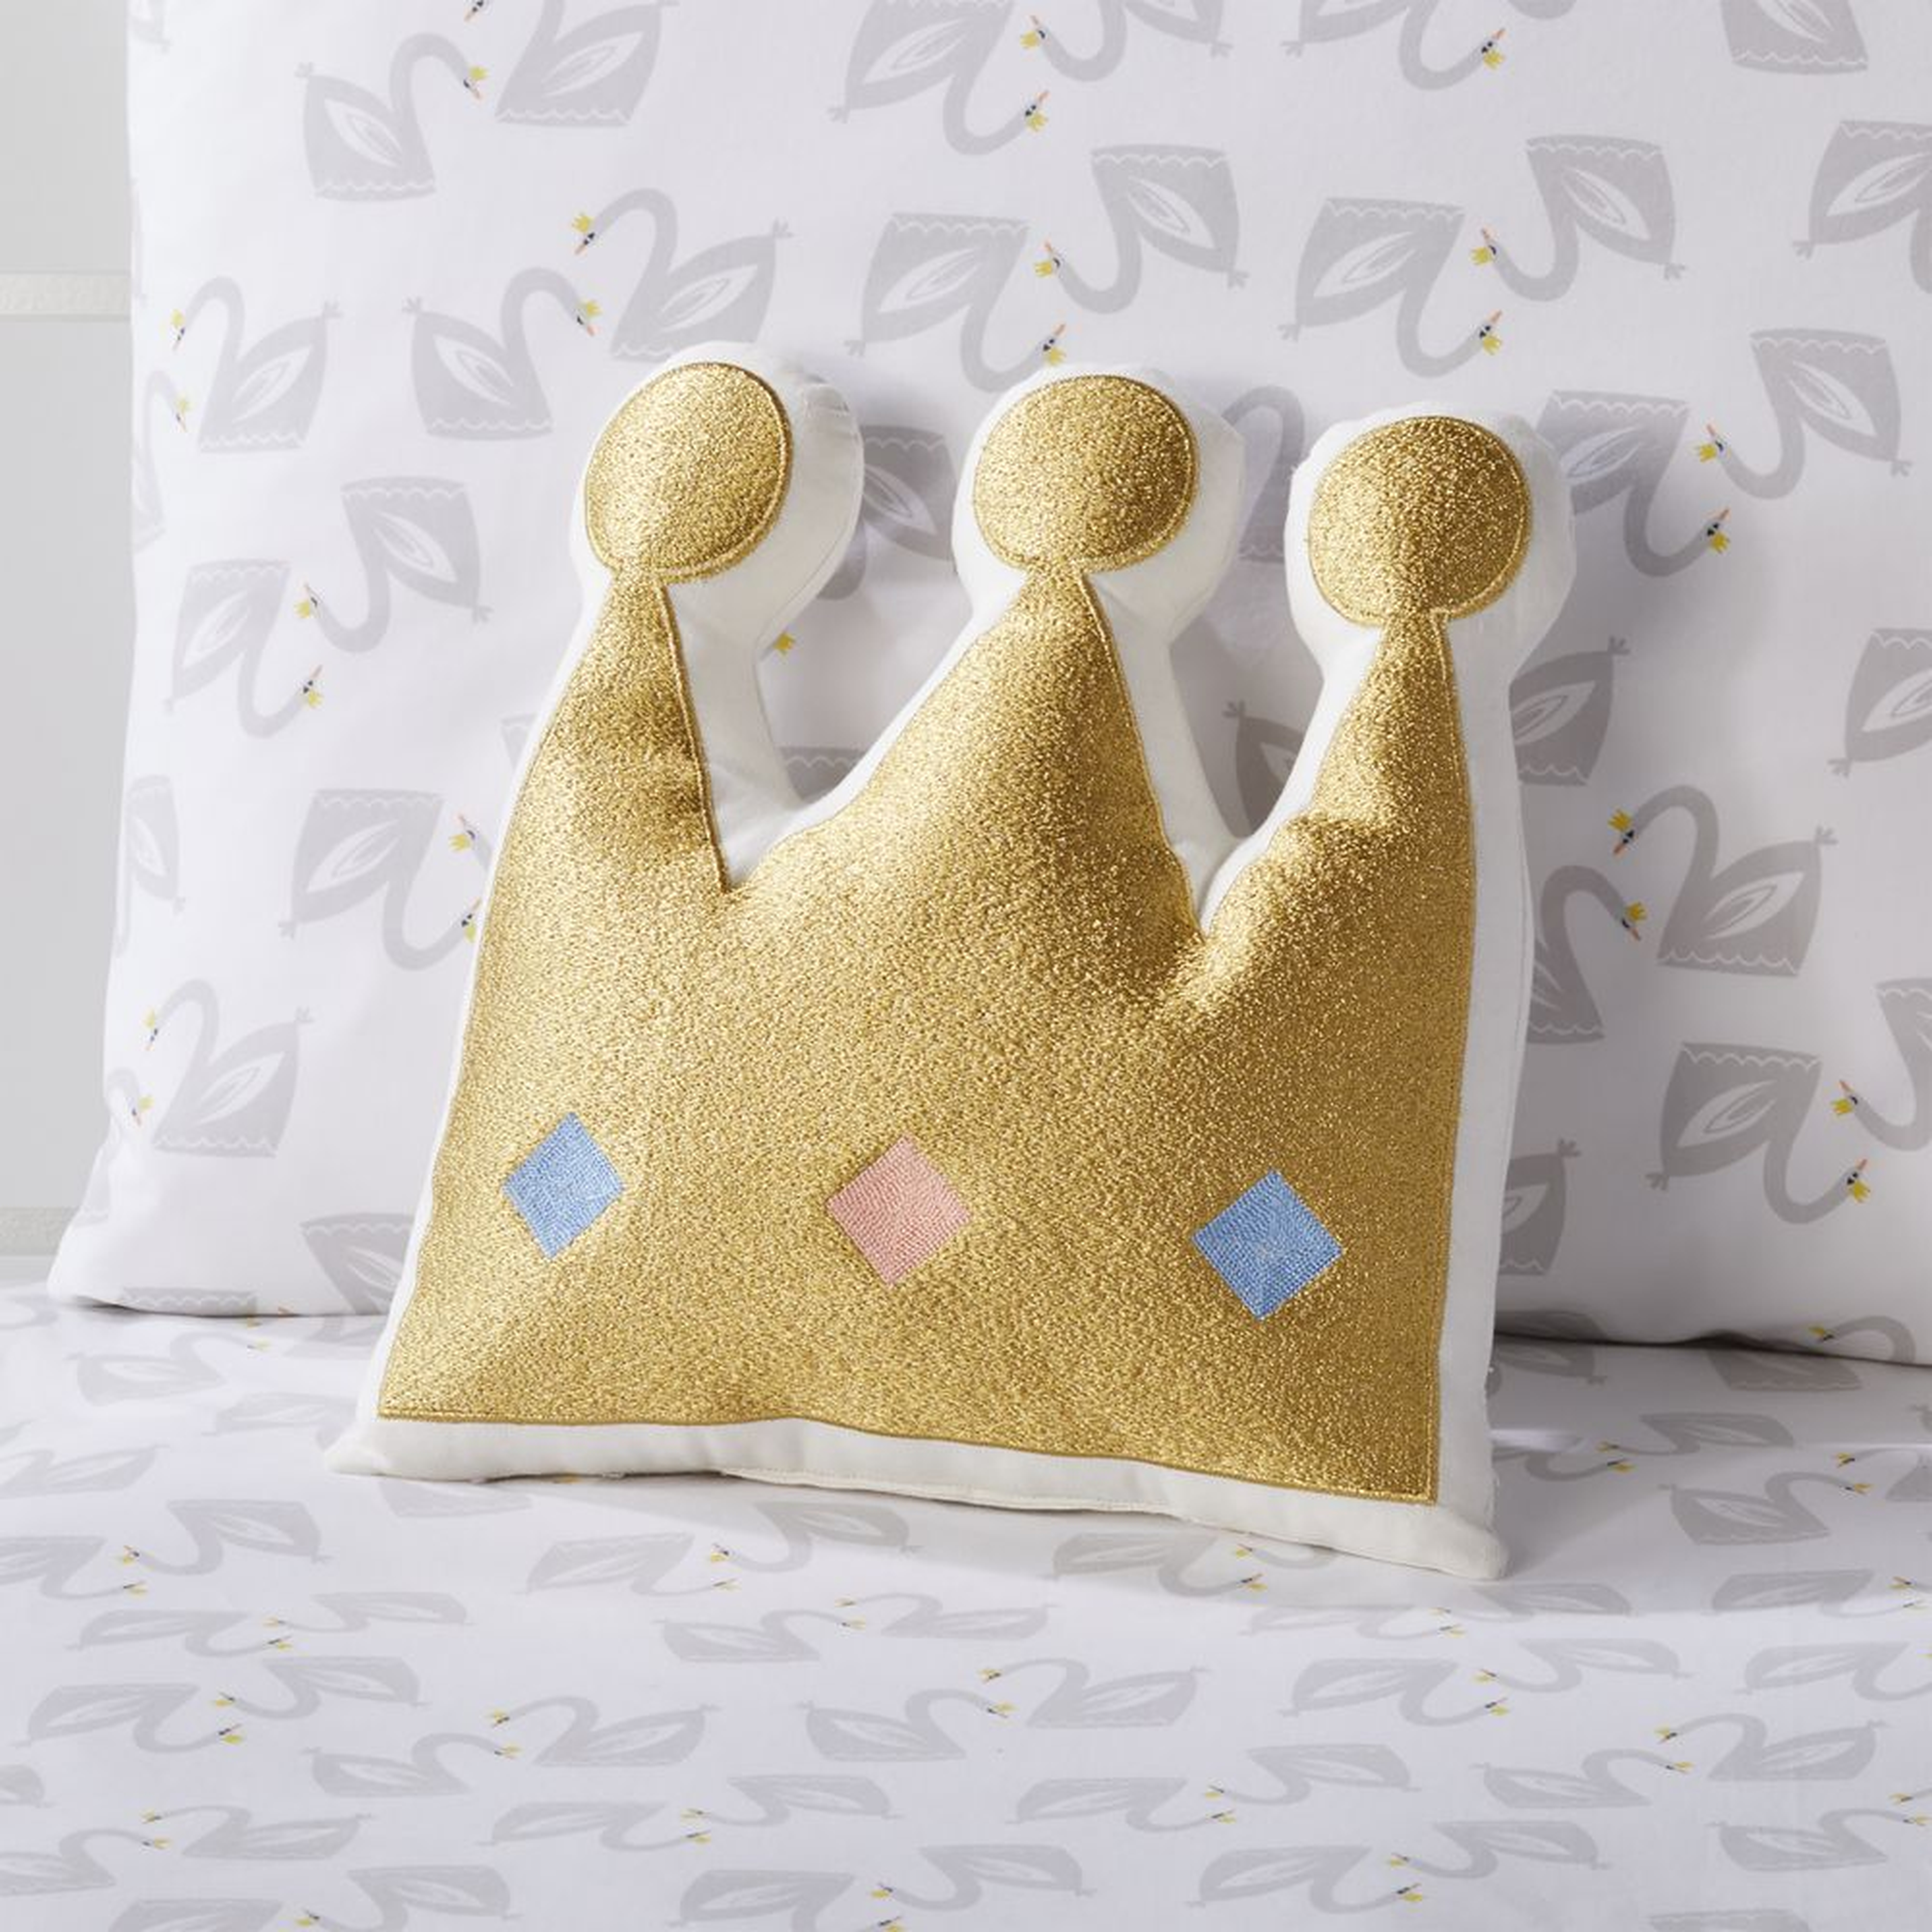 Crown Throw Pillow - Crate and Barrel